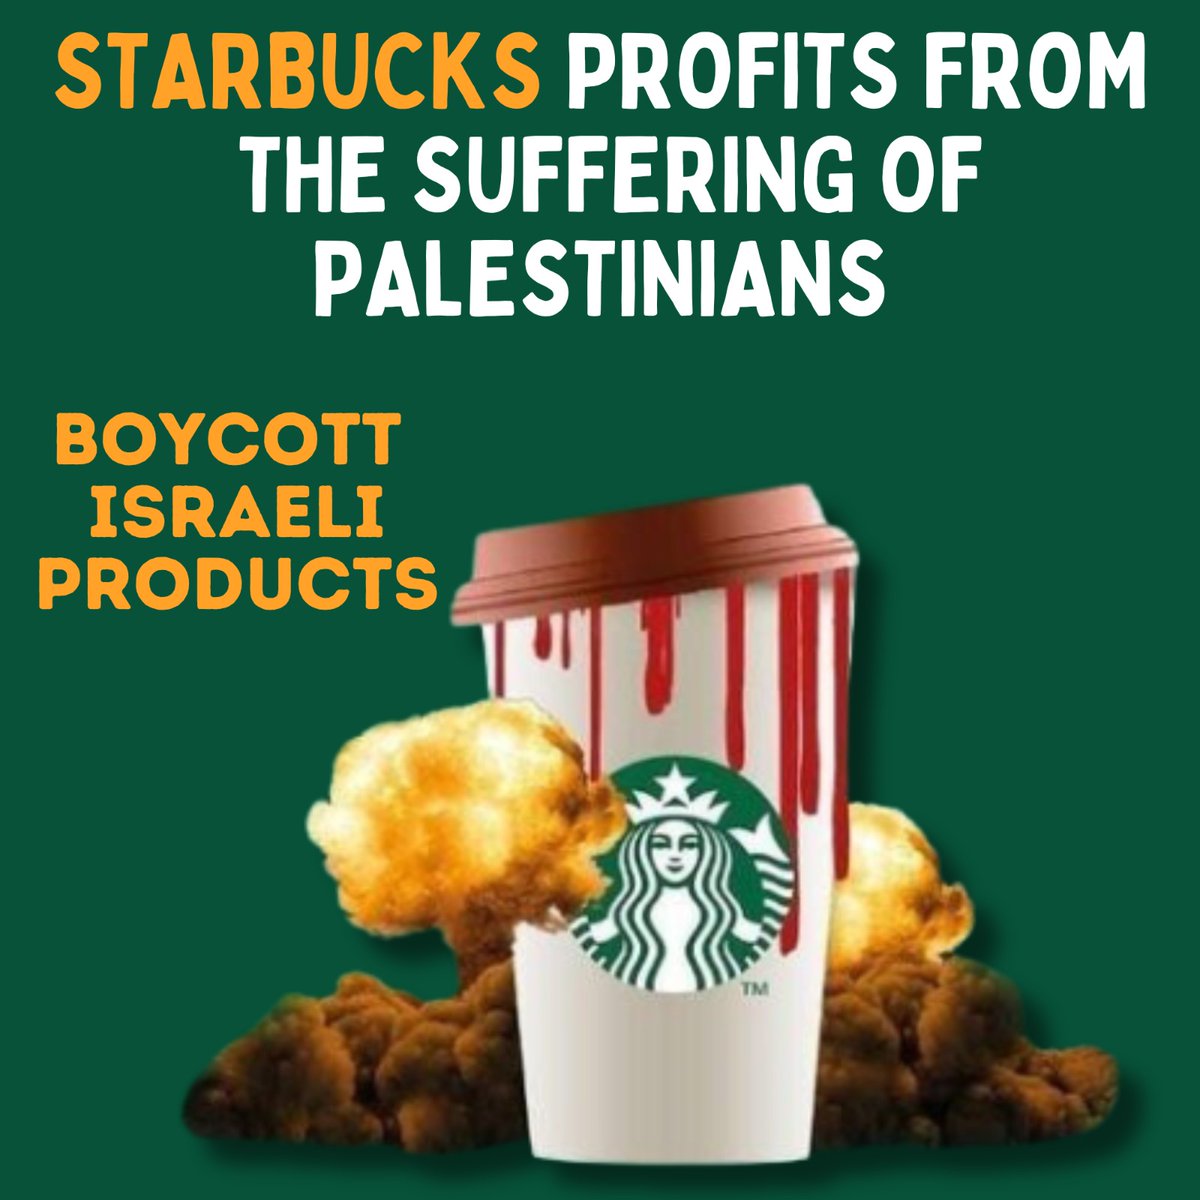 These brands, including Walls, Capstan, Unilever, and Lipton, are widely recognized household names, but they are also supporting injustice. Let's boycott them until they take a stand against oppression in Palestine. #فری_فلسطین